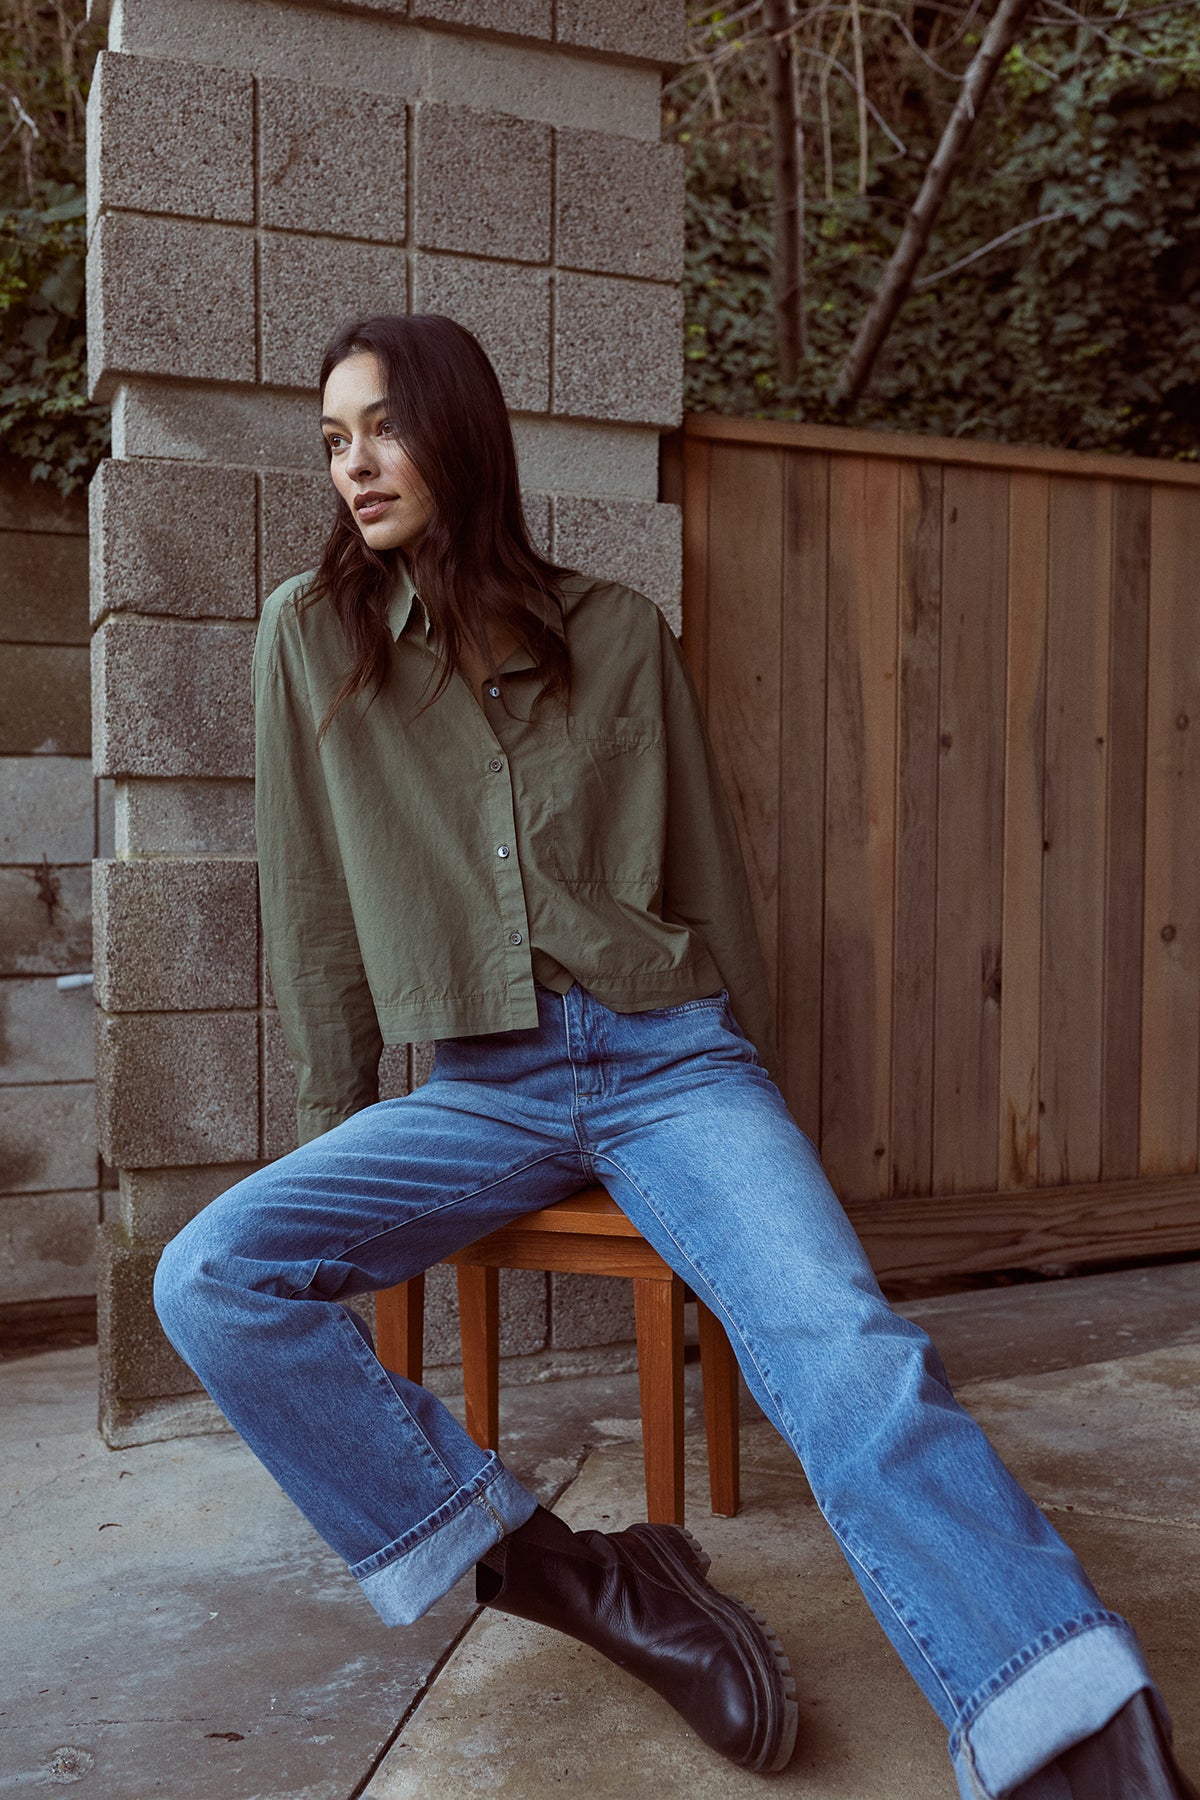   A woman is sitting on a chair wearing LUCILLE CROPPED BUTTON-UP SHIRT by Velvet by Graham & Spencer jeans and boots. 